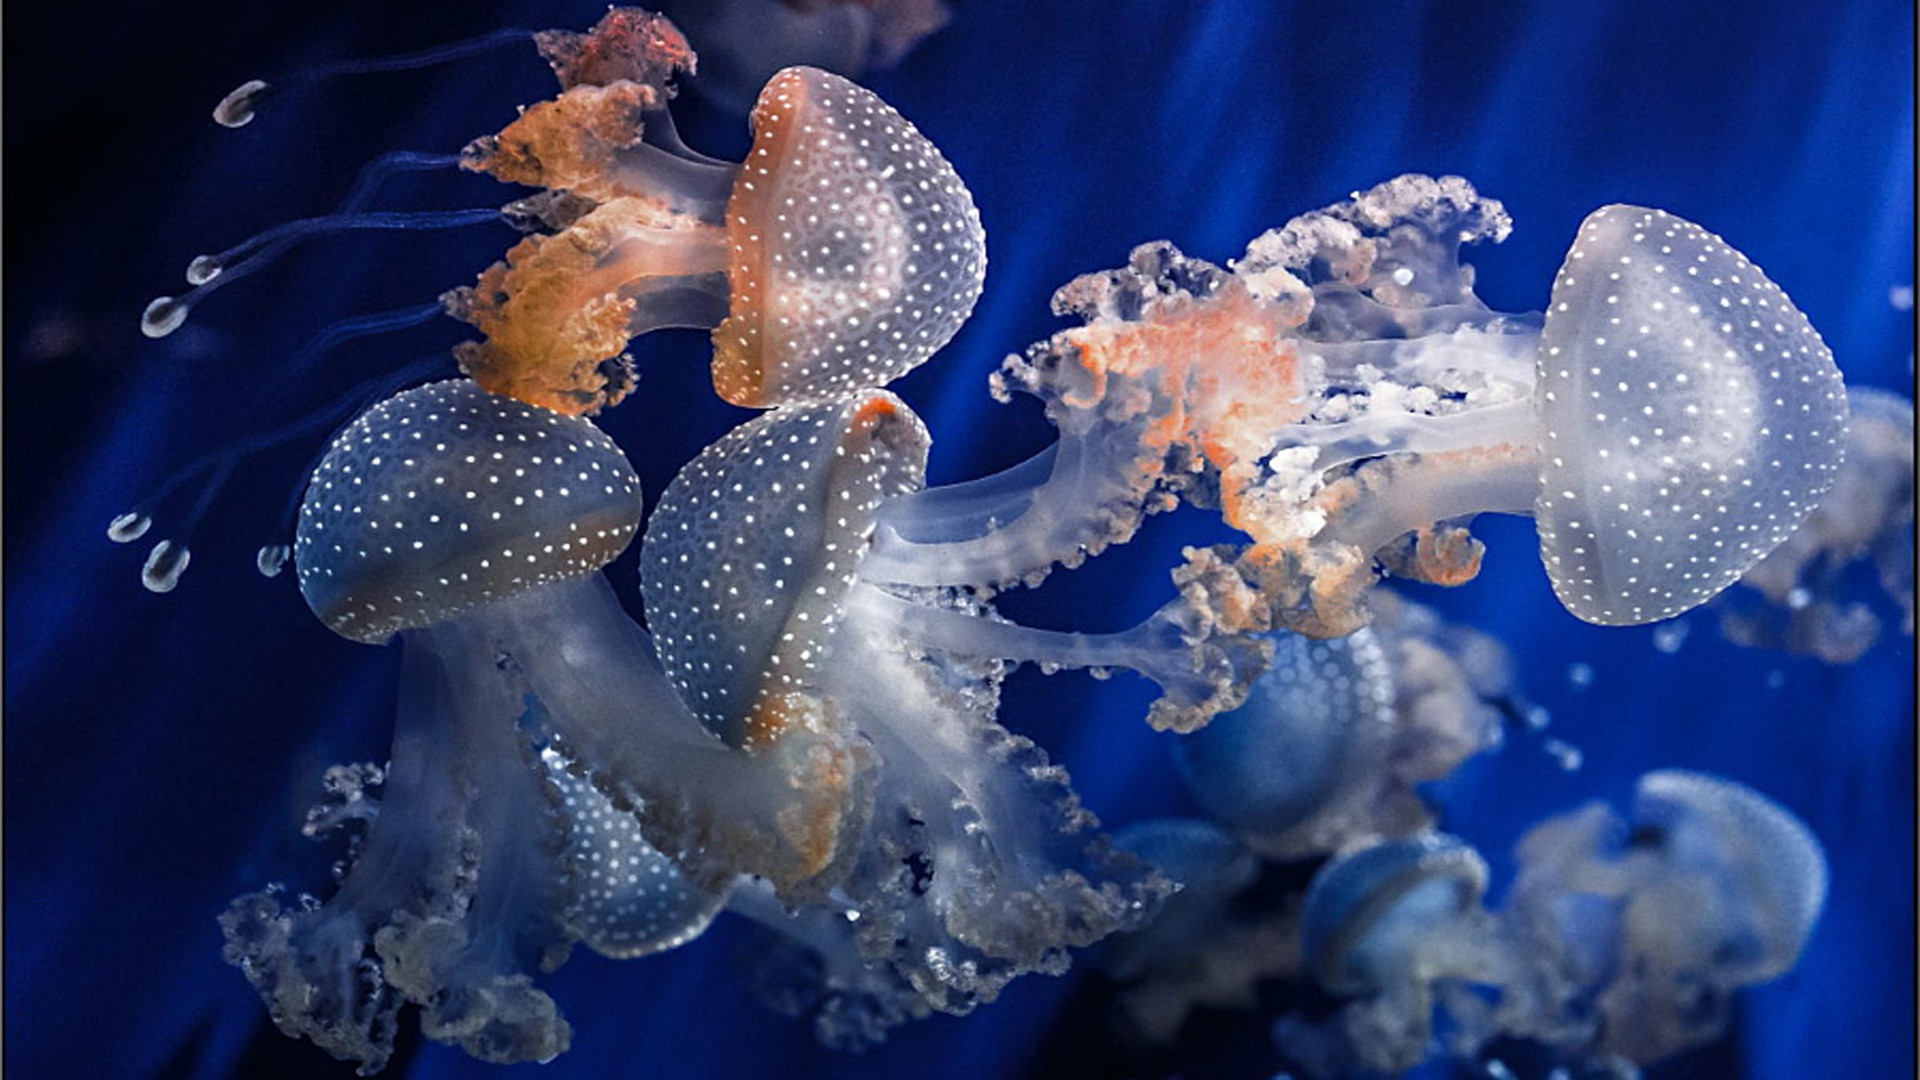 Jellyfish Wallpaper HD Pictures To Pin